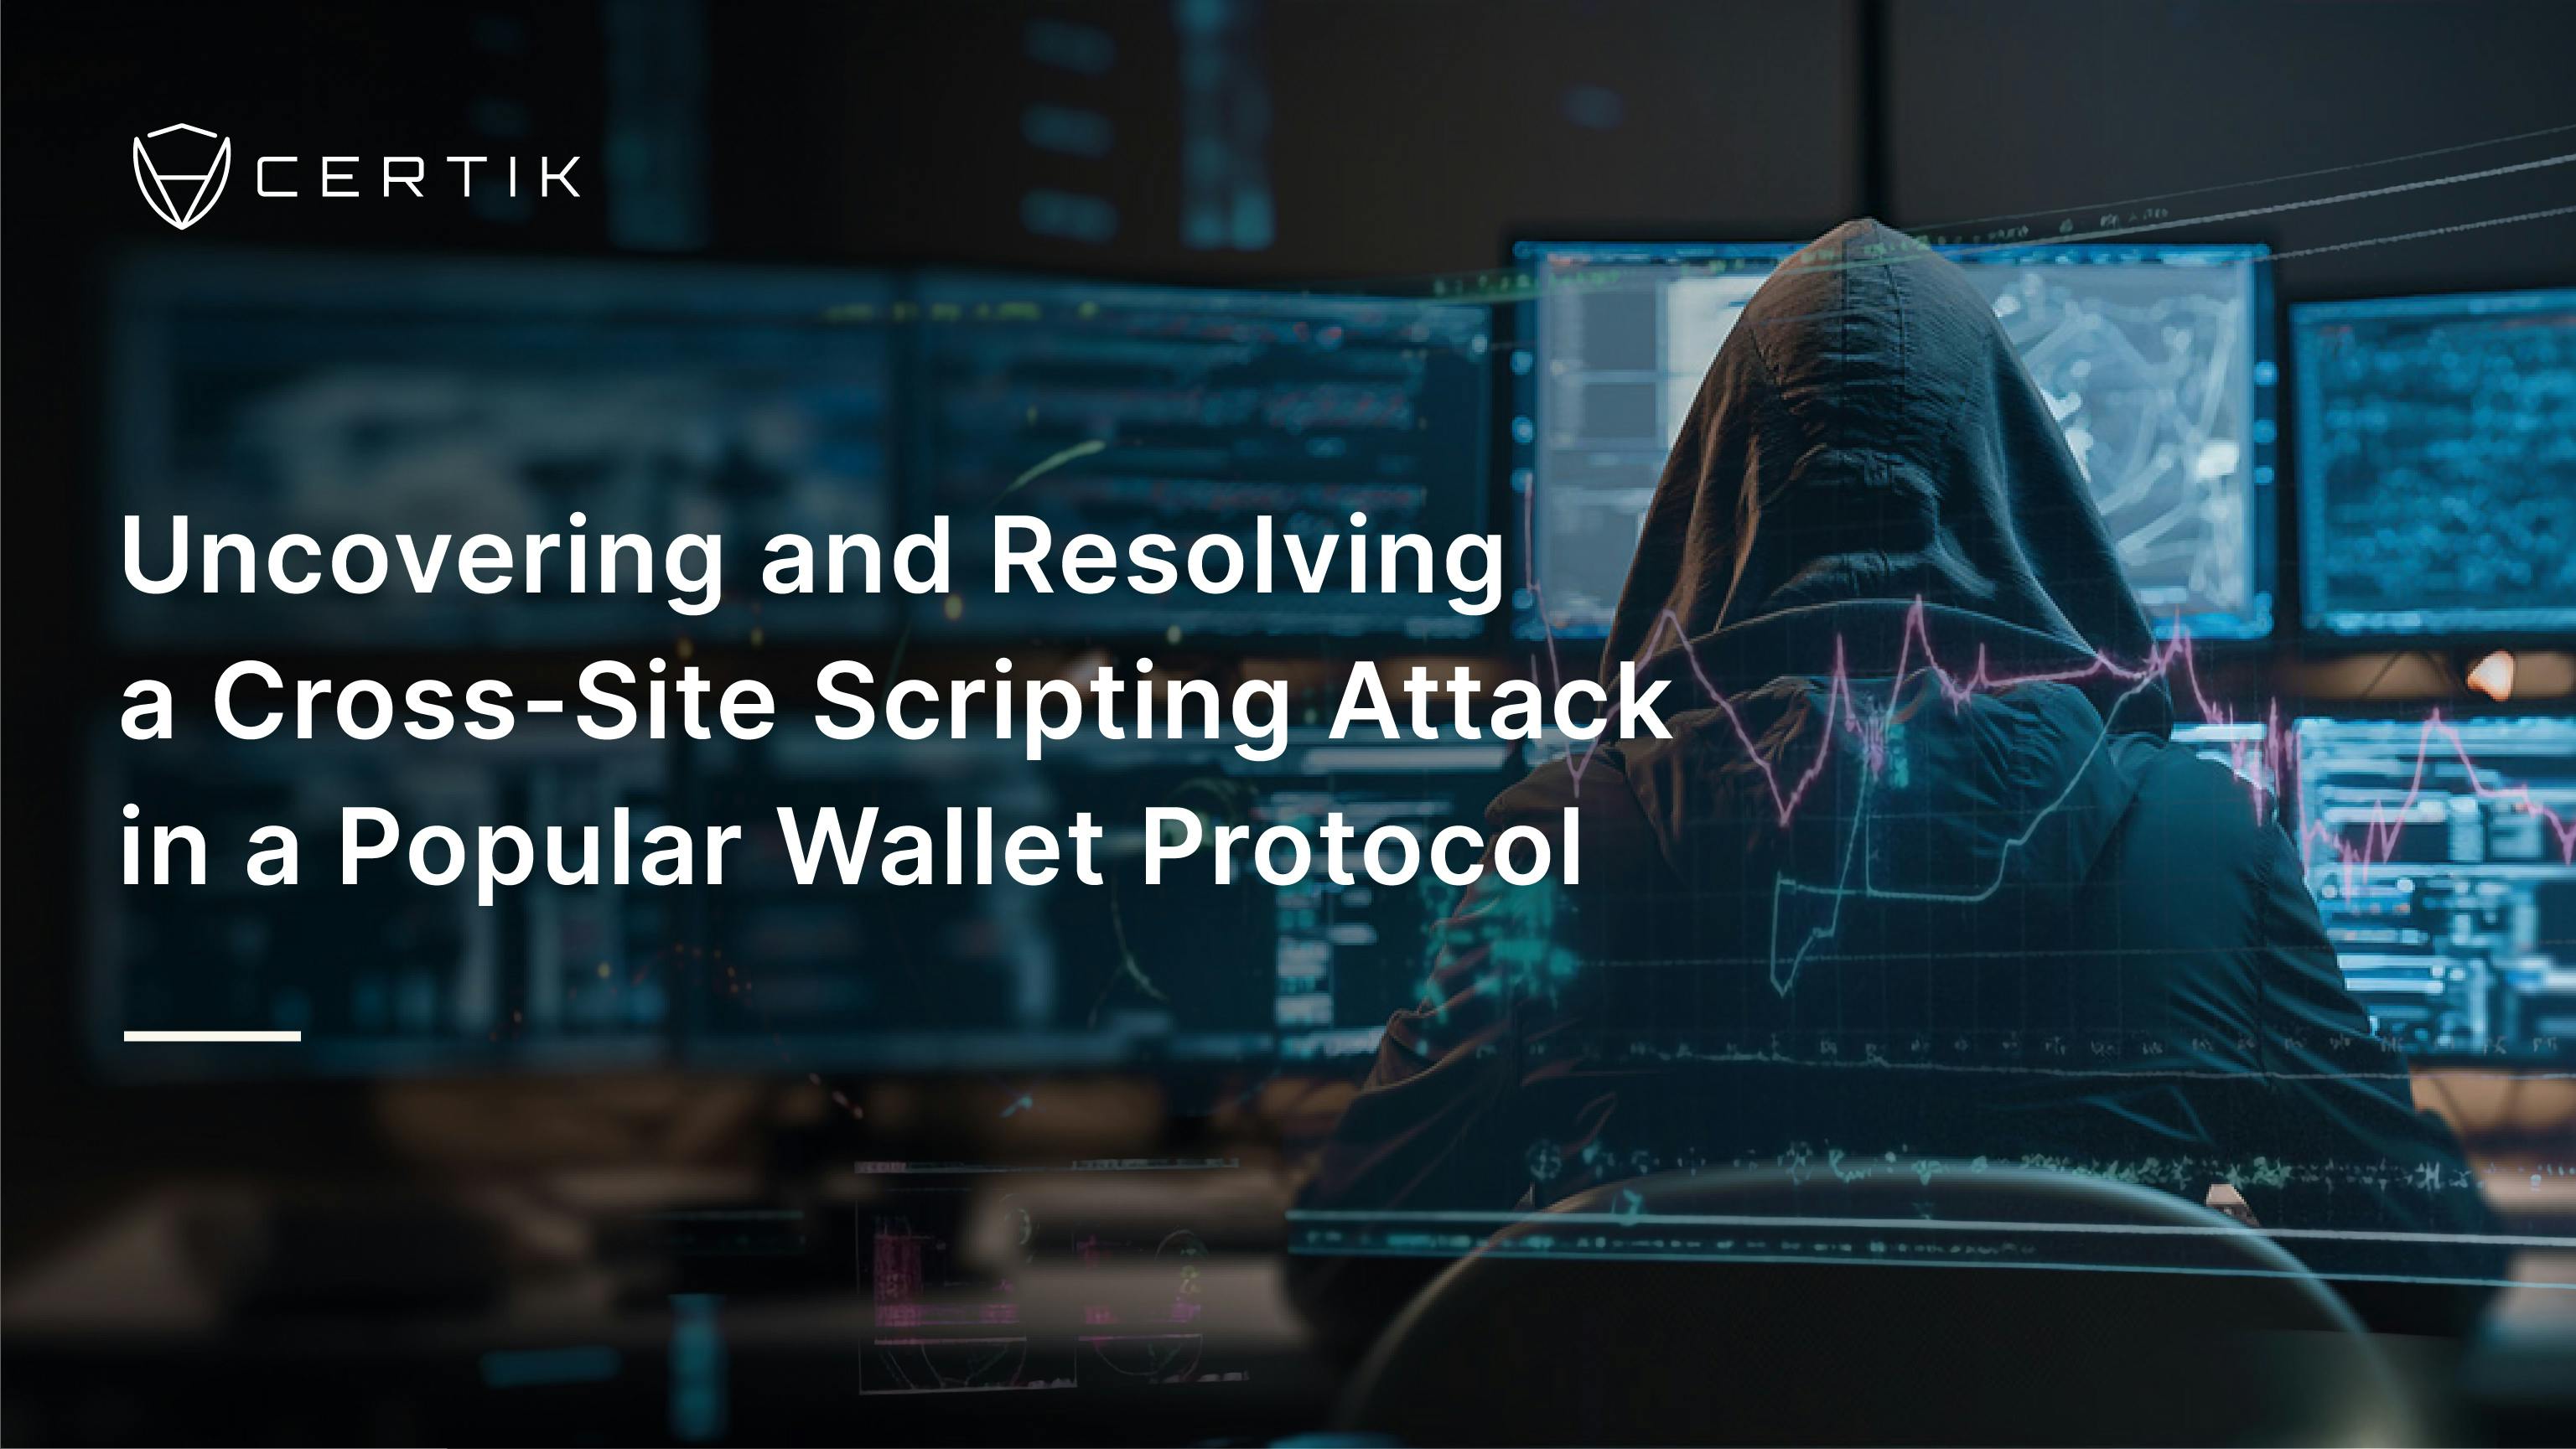 Uncovering and Resolving a Cross-Site Scripting Attack in a Popular Wallet Protocol